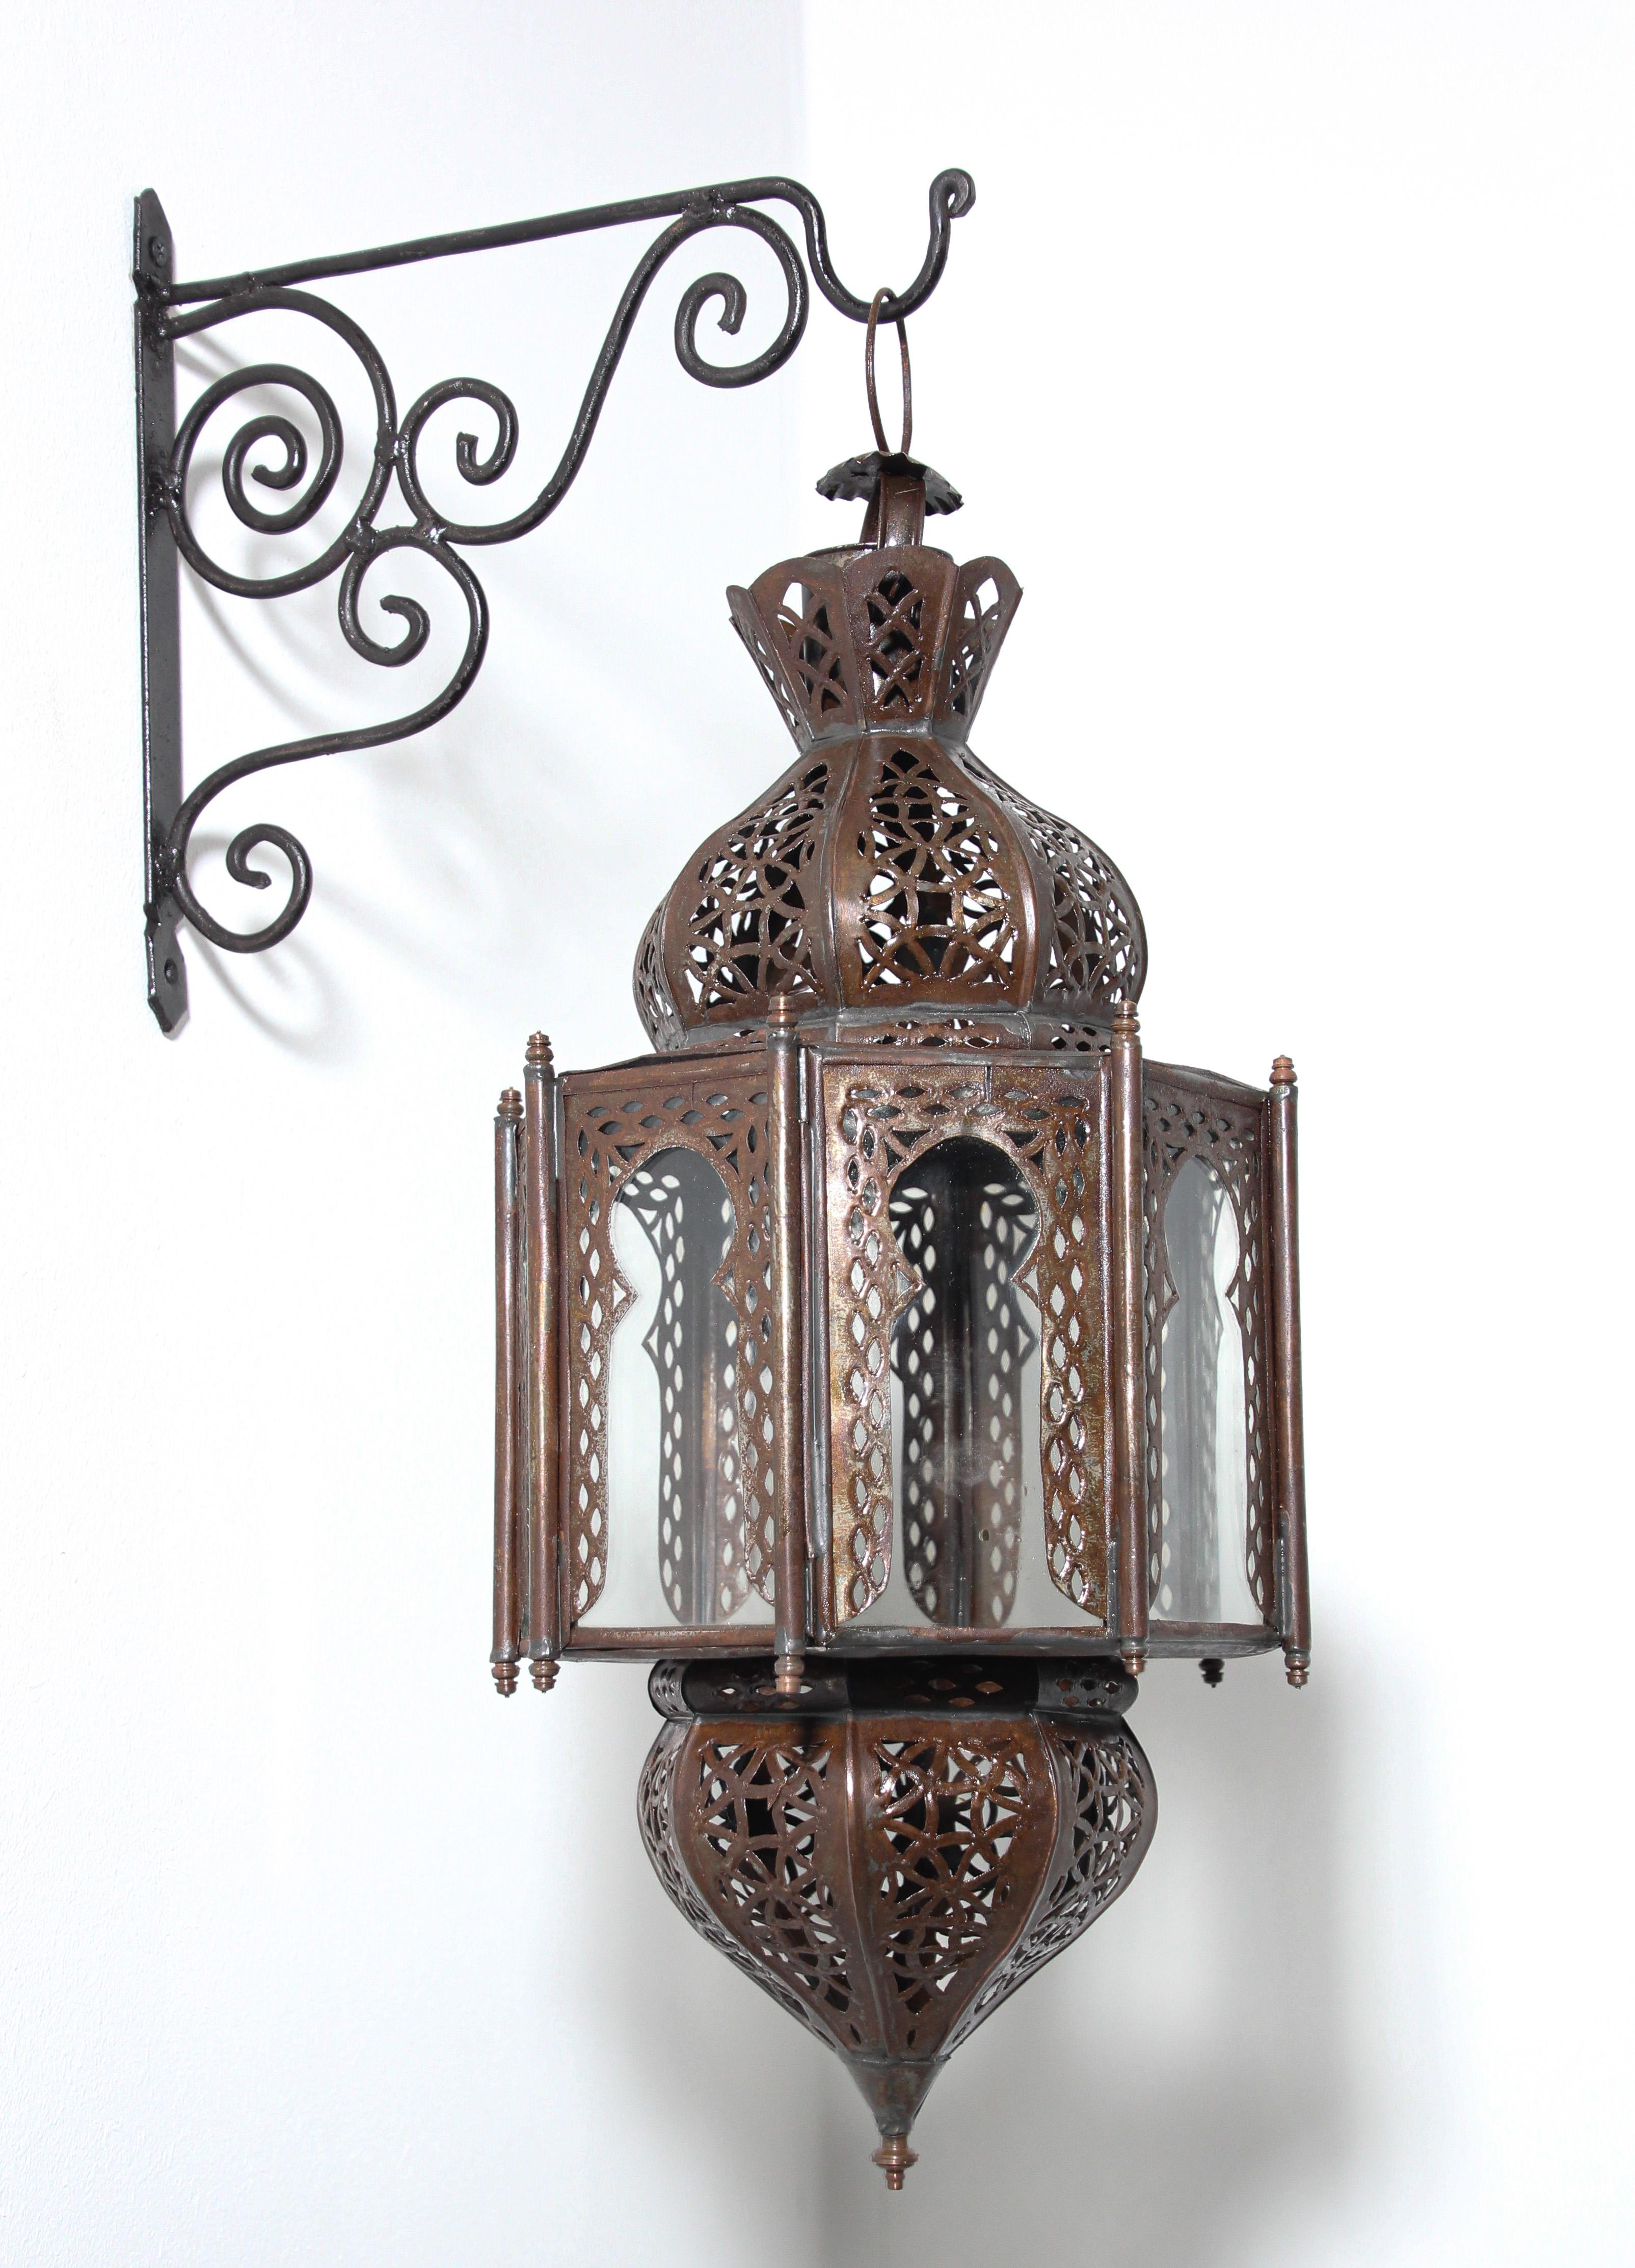 Moroccan Moorish metal and clear glass lantern.
Moroccan lantern in octagonal shape with rust color metal finish and clear glass.
The top and bottom with open metal work with Moorish design.
Moroccan lighting will cast light on the walls with pretty